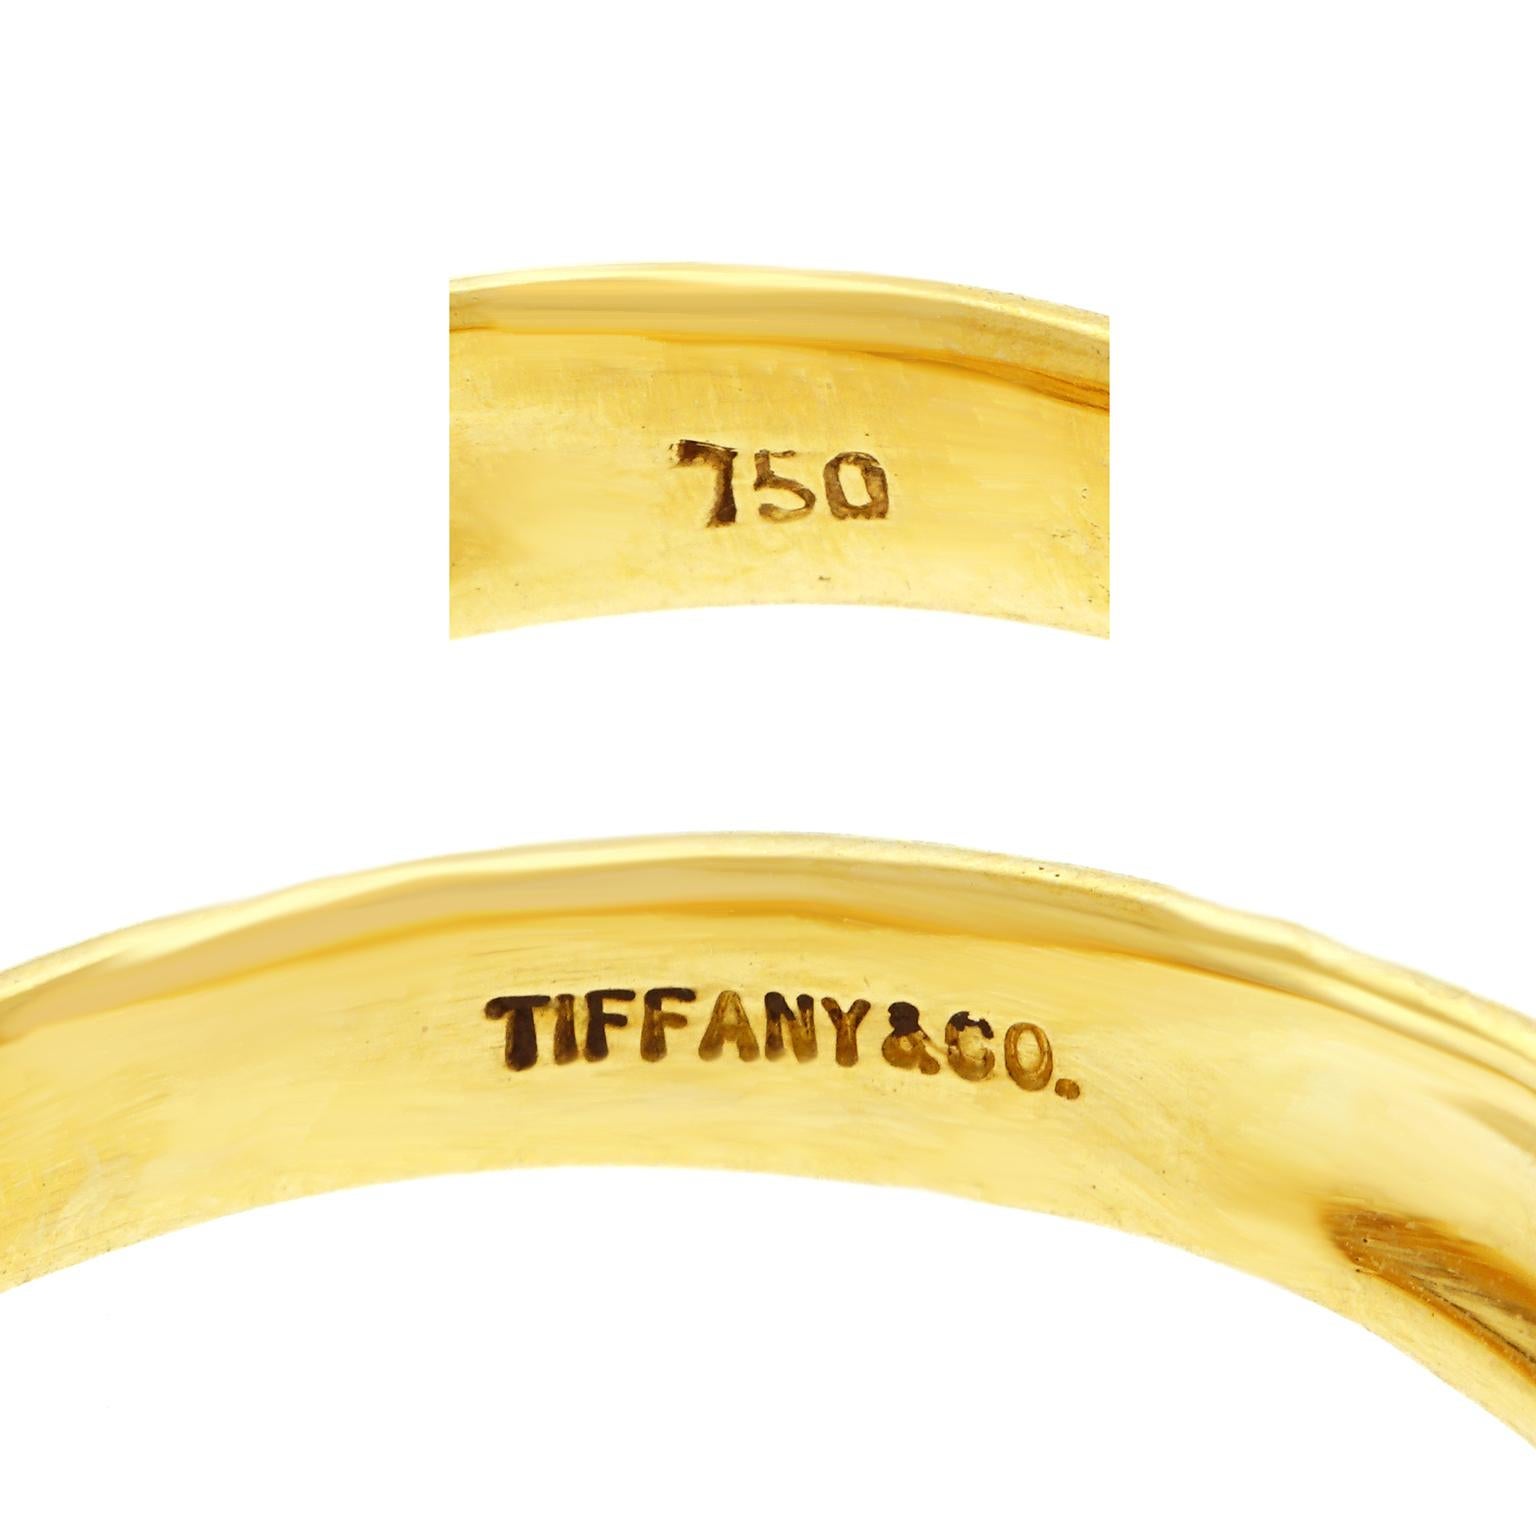 Tiffany & Co. Ruby Ring in Gold 1